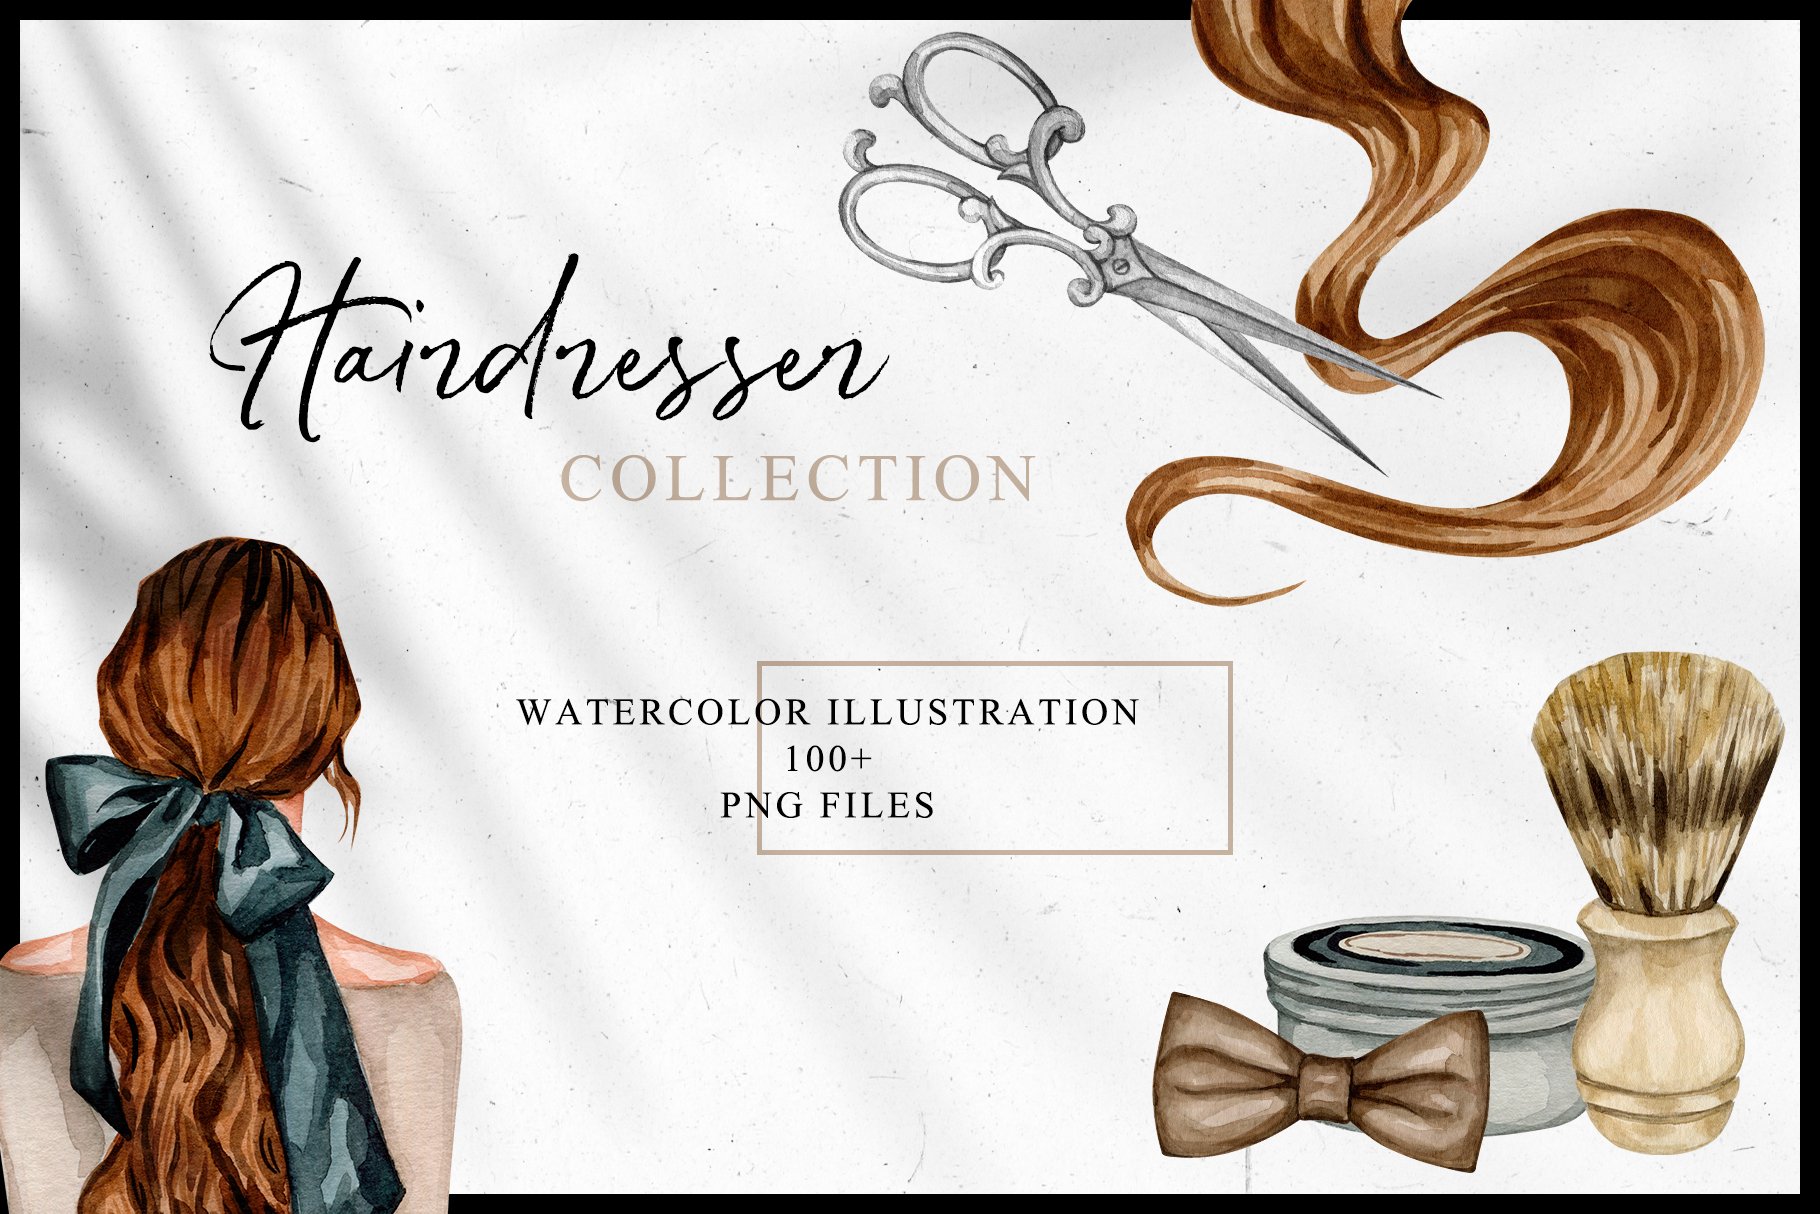 Hairdresser Collection cover image.